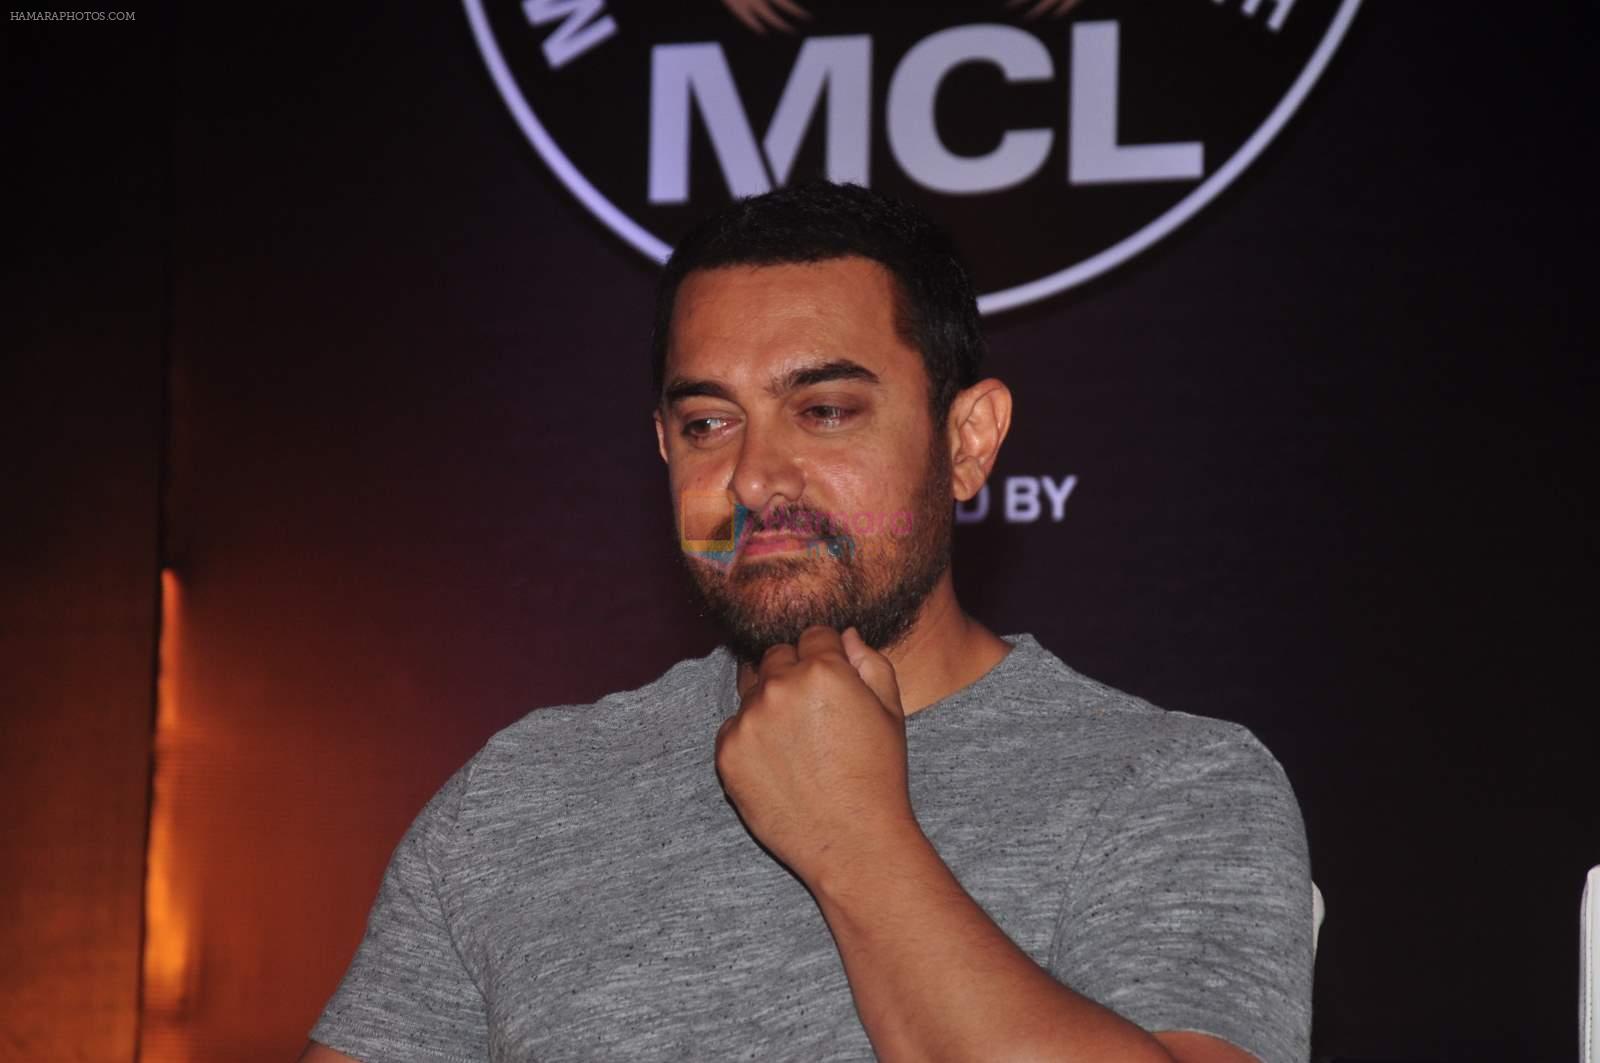 Aamir Khan at Chess tournament in Mumbai on 22nd May 2015